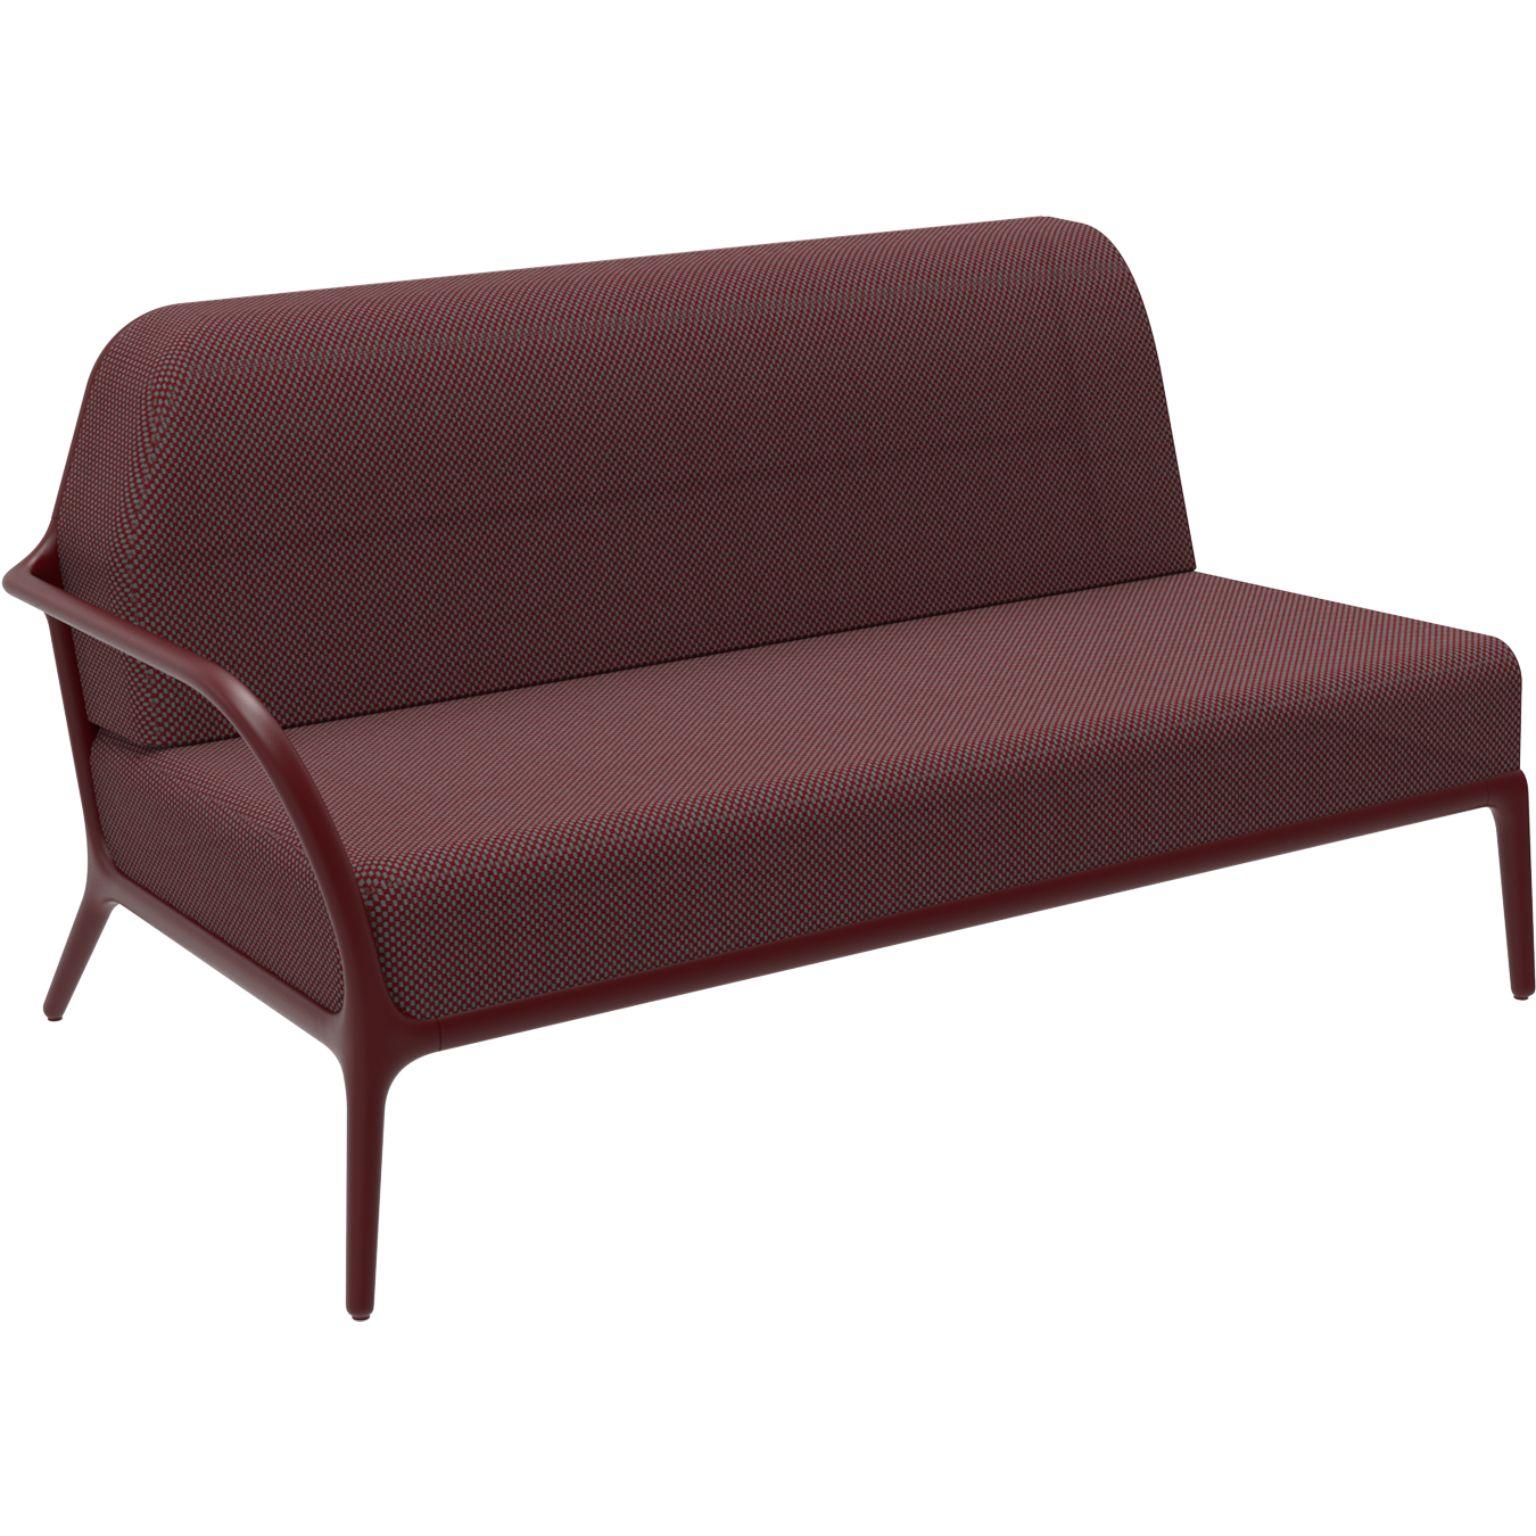 Xaloc Right 160 burgundy modular sofa by MOWEE
Dimensions: D100 x W160 x H81 cm (Seat Height 42 cm)
Material: Aluminum, Textile
Weight: 37 kg
Also Available in different colors and finishes. 

 Xaloc synthesizes the lines of interior furniture